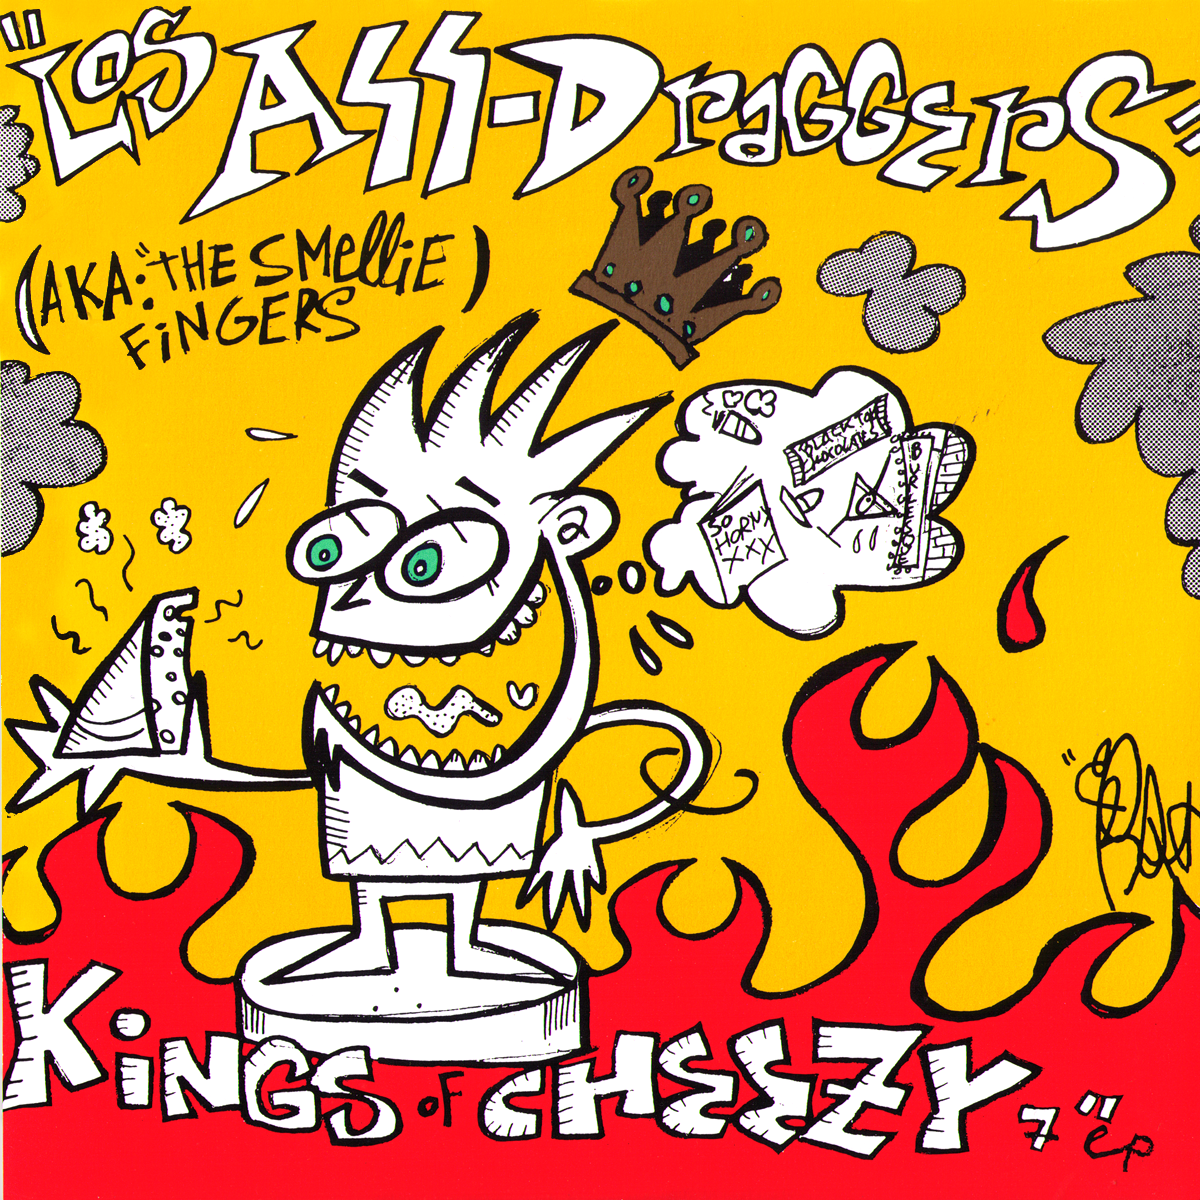 Los Ass-Draggers- Kings Of Cheezy 7" ~REISSUE OF FIRST RECORD / ZEKE!